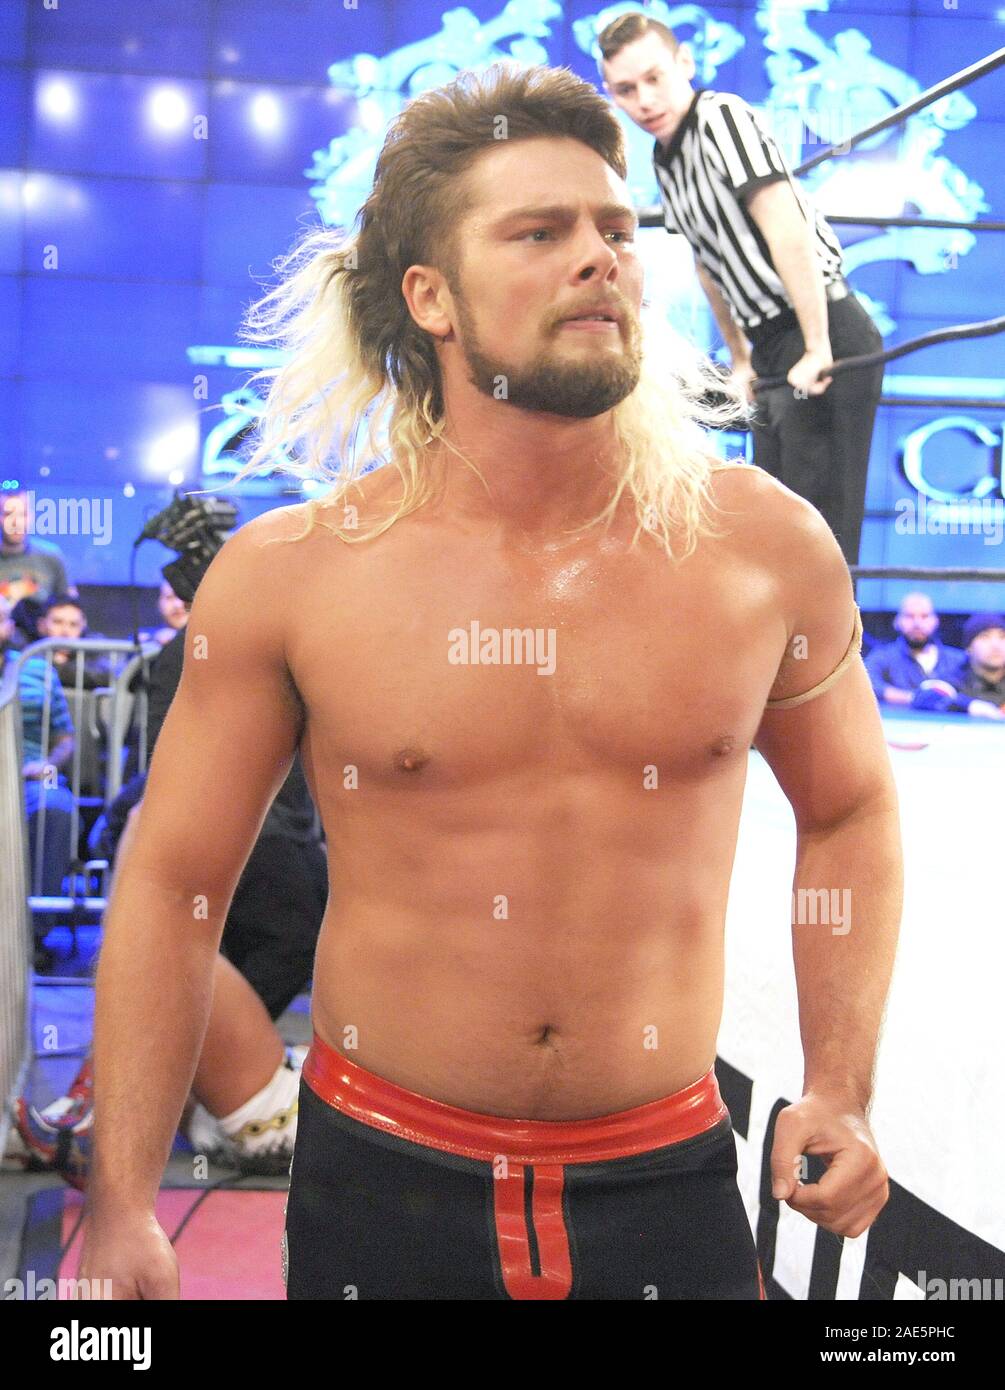 USA Network Releases Article Confirming That Brian Pillman Jr. Has